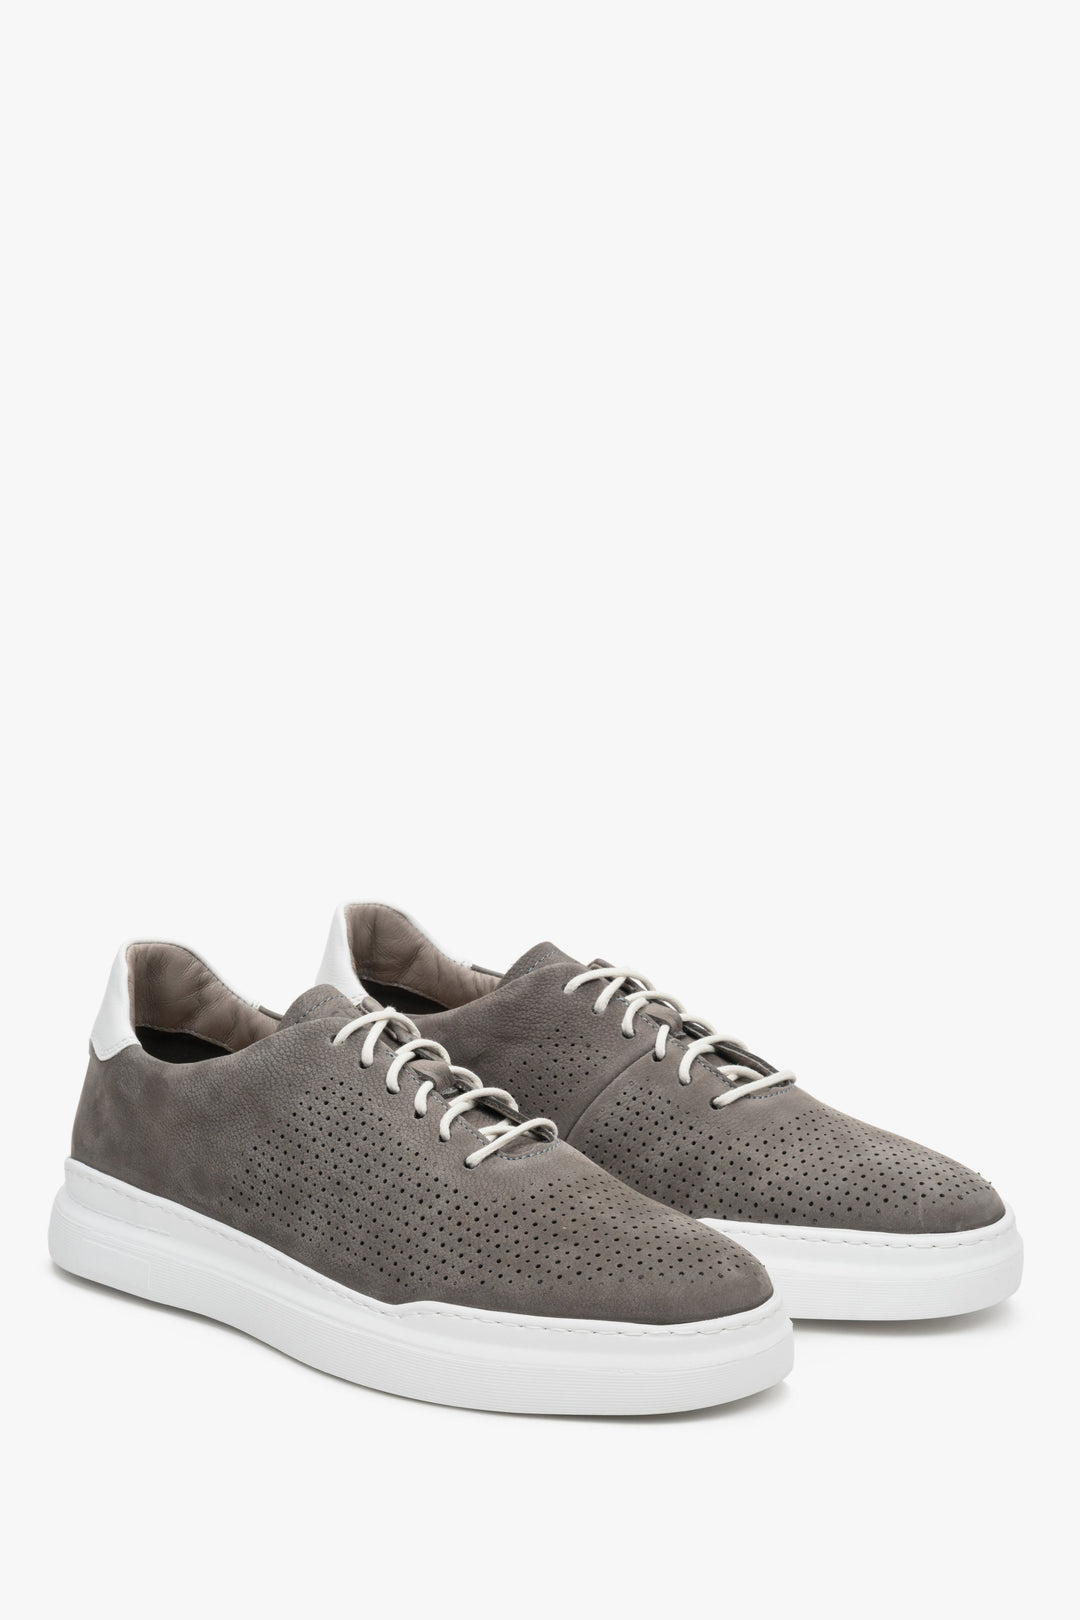 Grey men's nubuck sneakers with perforation for summer - presentation of the toe and side seam of the shoe.